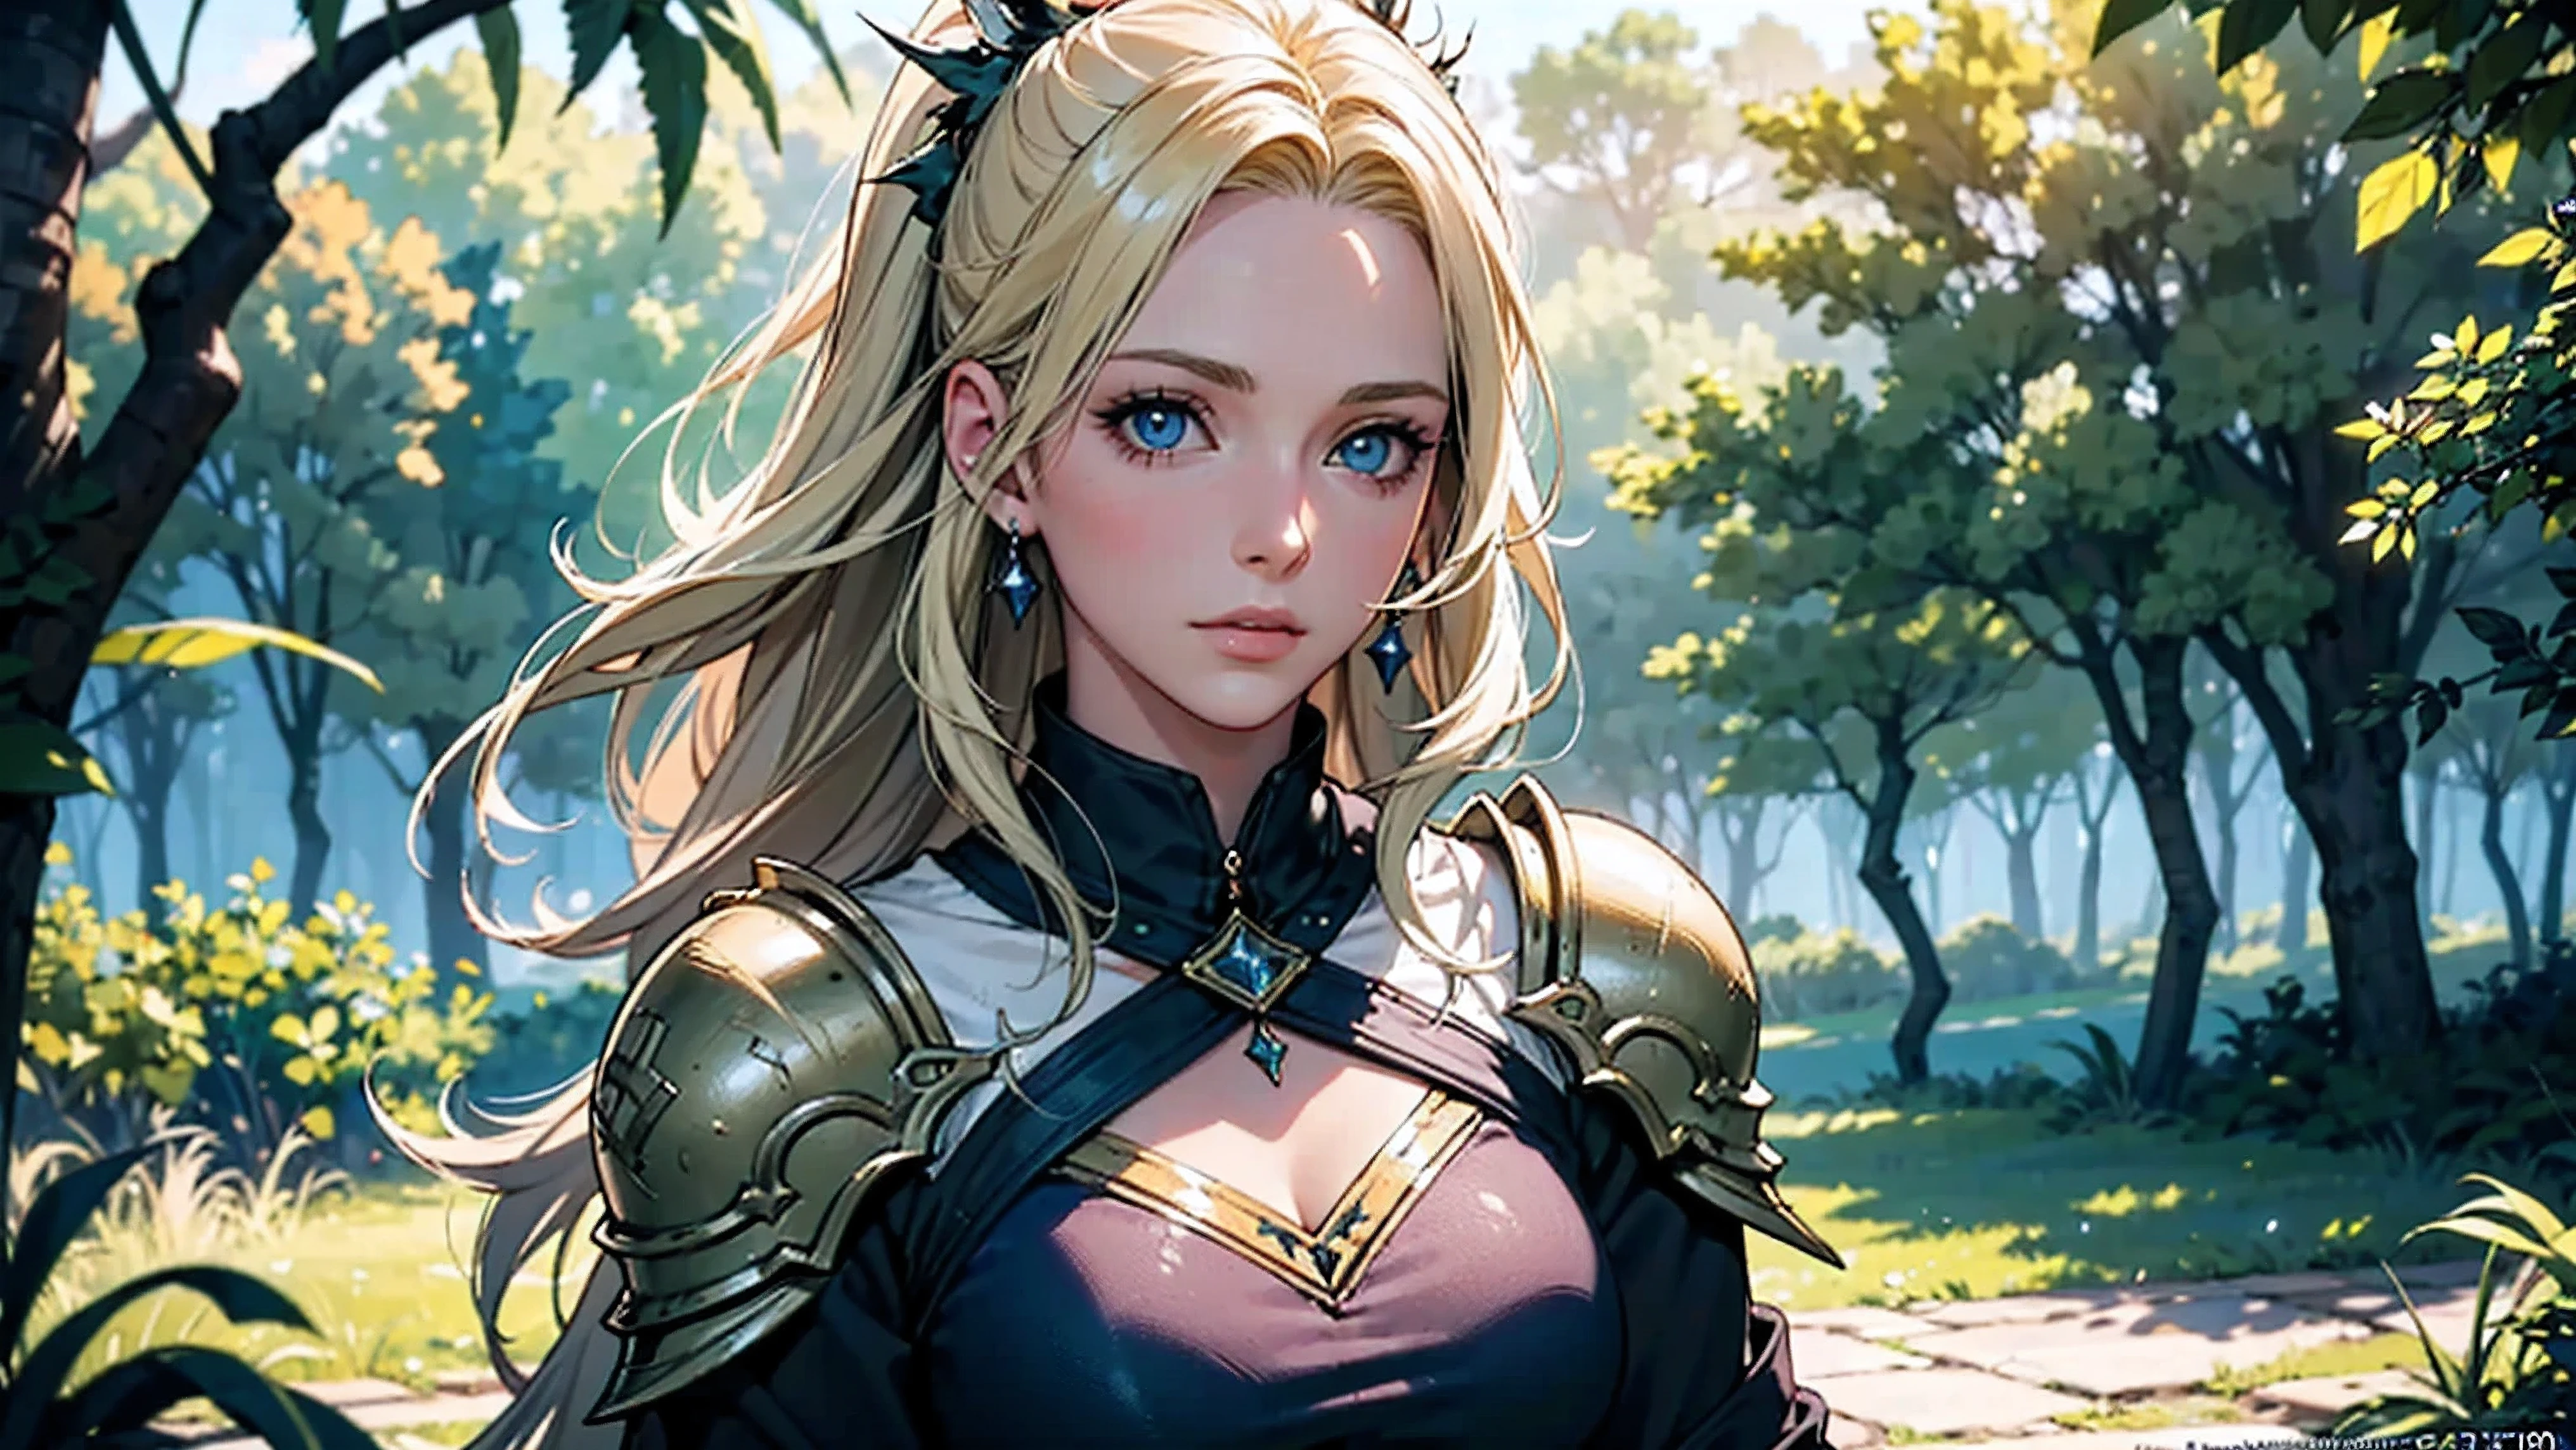 ((Wallpaper in 2.5D anime, MMORPG style), (best quality, 4k, 8k, highres, masterpiece:1.2), ultra-detailed, (realistic, photo-realistic:1.37)). In a wide, expansive setting of dazzling fantasy, a blonde warrior woman of European beauty assumes a dynamic combat pose, em meio a uma paisagem encantadora. His facial features are remarkably elaborate, com olhos grandes e expressivos e pupilas perfeitas. Her vibrant hair in highlighted tones frames a face with delicate, textured skin., radiating perfection and radiance. The surrounding scenery is enriched by magical and ultra-detailed elements, like lush trees with brilliant foliage that seem to pulse with otherworldly energy, and an ethereal aura that permeates the entire landscape, criando uma atmosfera de beleza e encanto digna de um conto de fadas. Cada aspecto, be it the lush greenery or the rays of golden light that filter through the treetops, transportando os observadores para um mundo de maravilhas e magia.